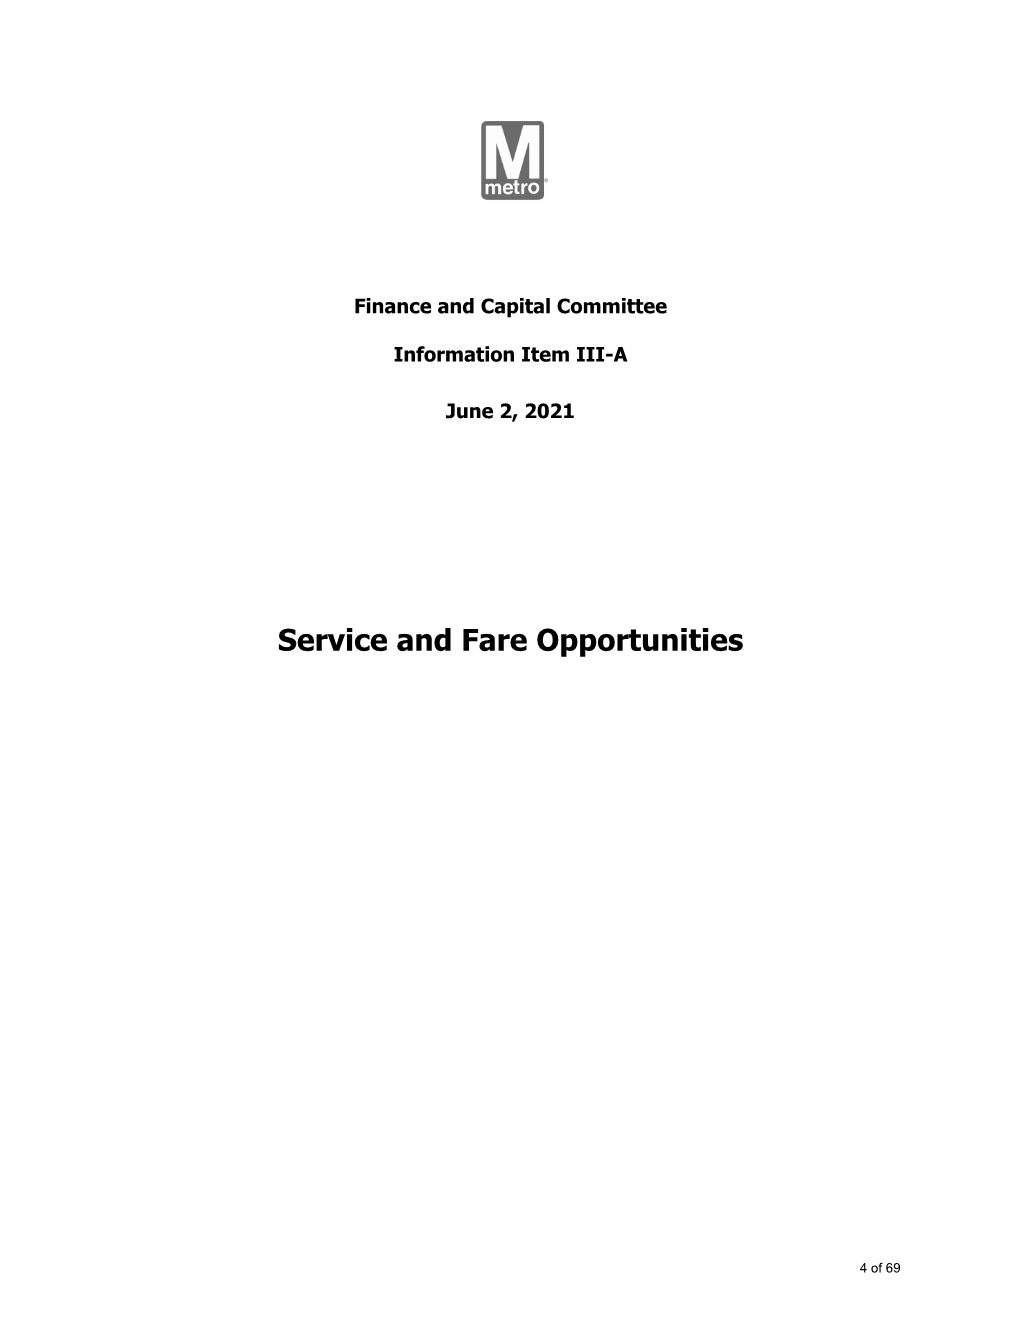 Service and Fare Opportunities